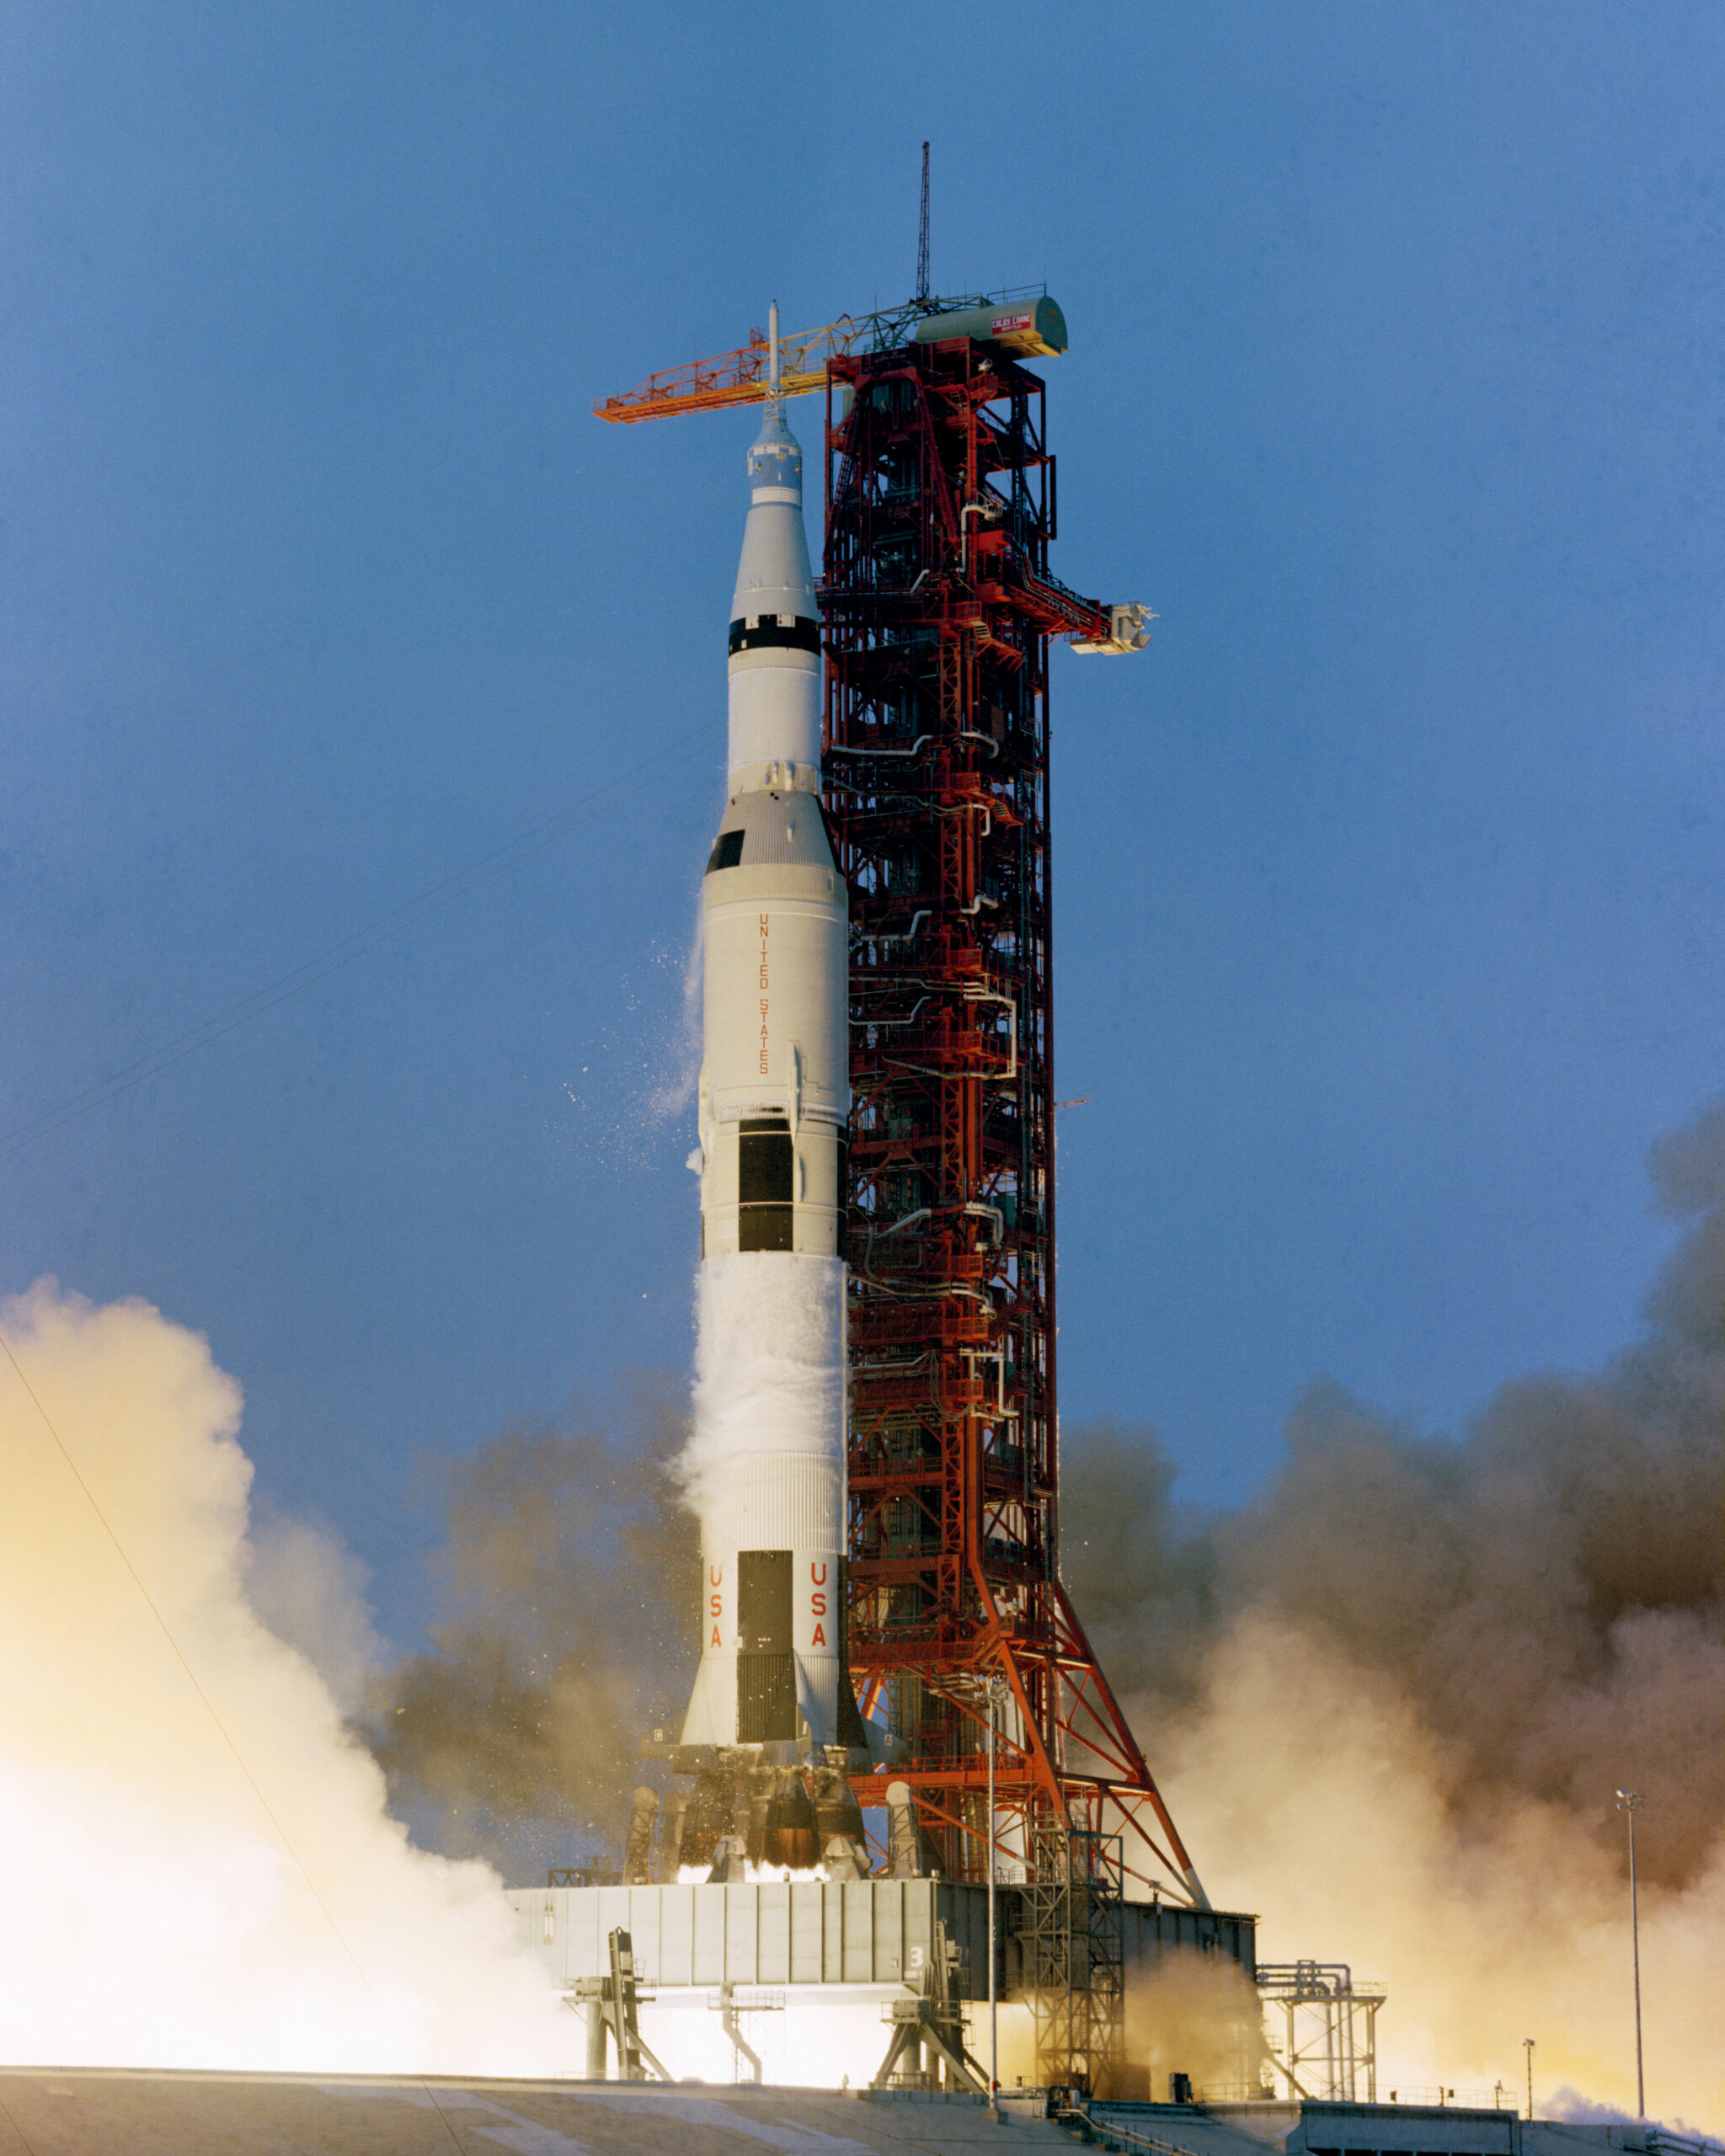 Apollo 13 launches from Kennedy Space Center, April 11, 1970